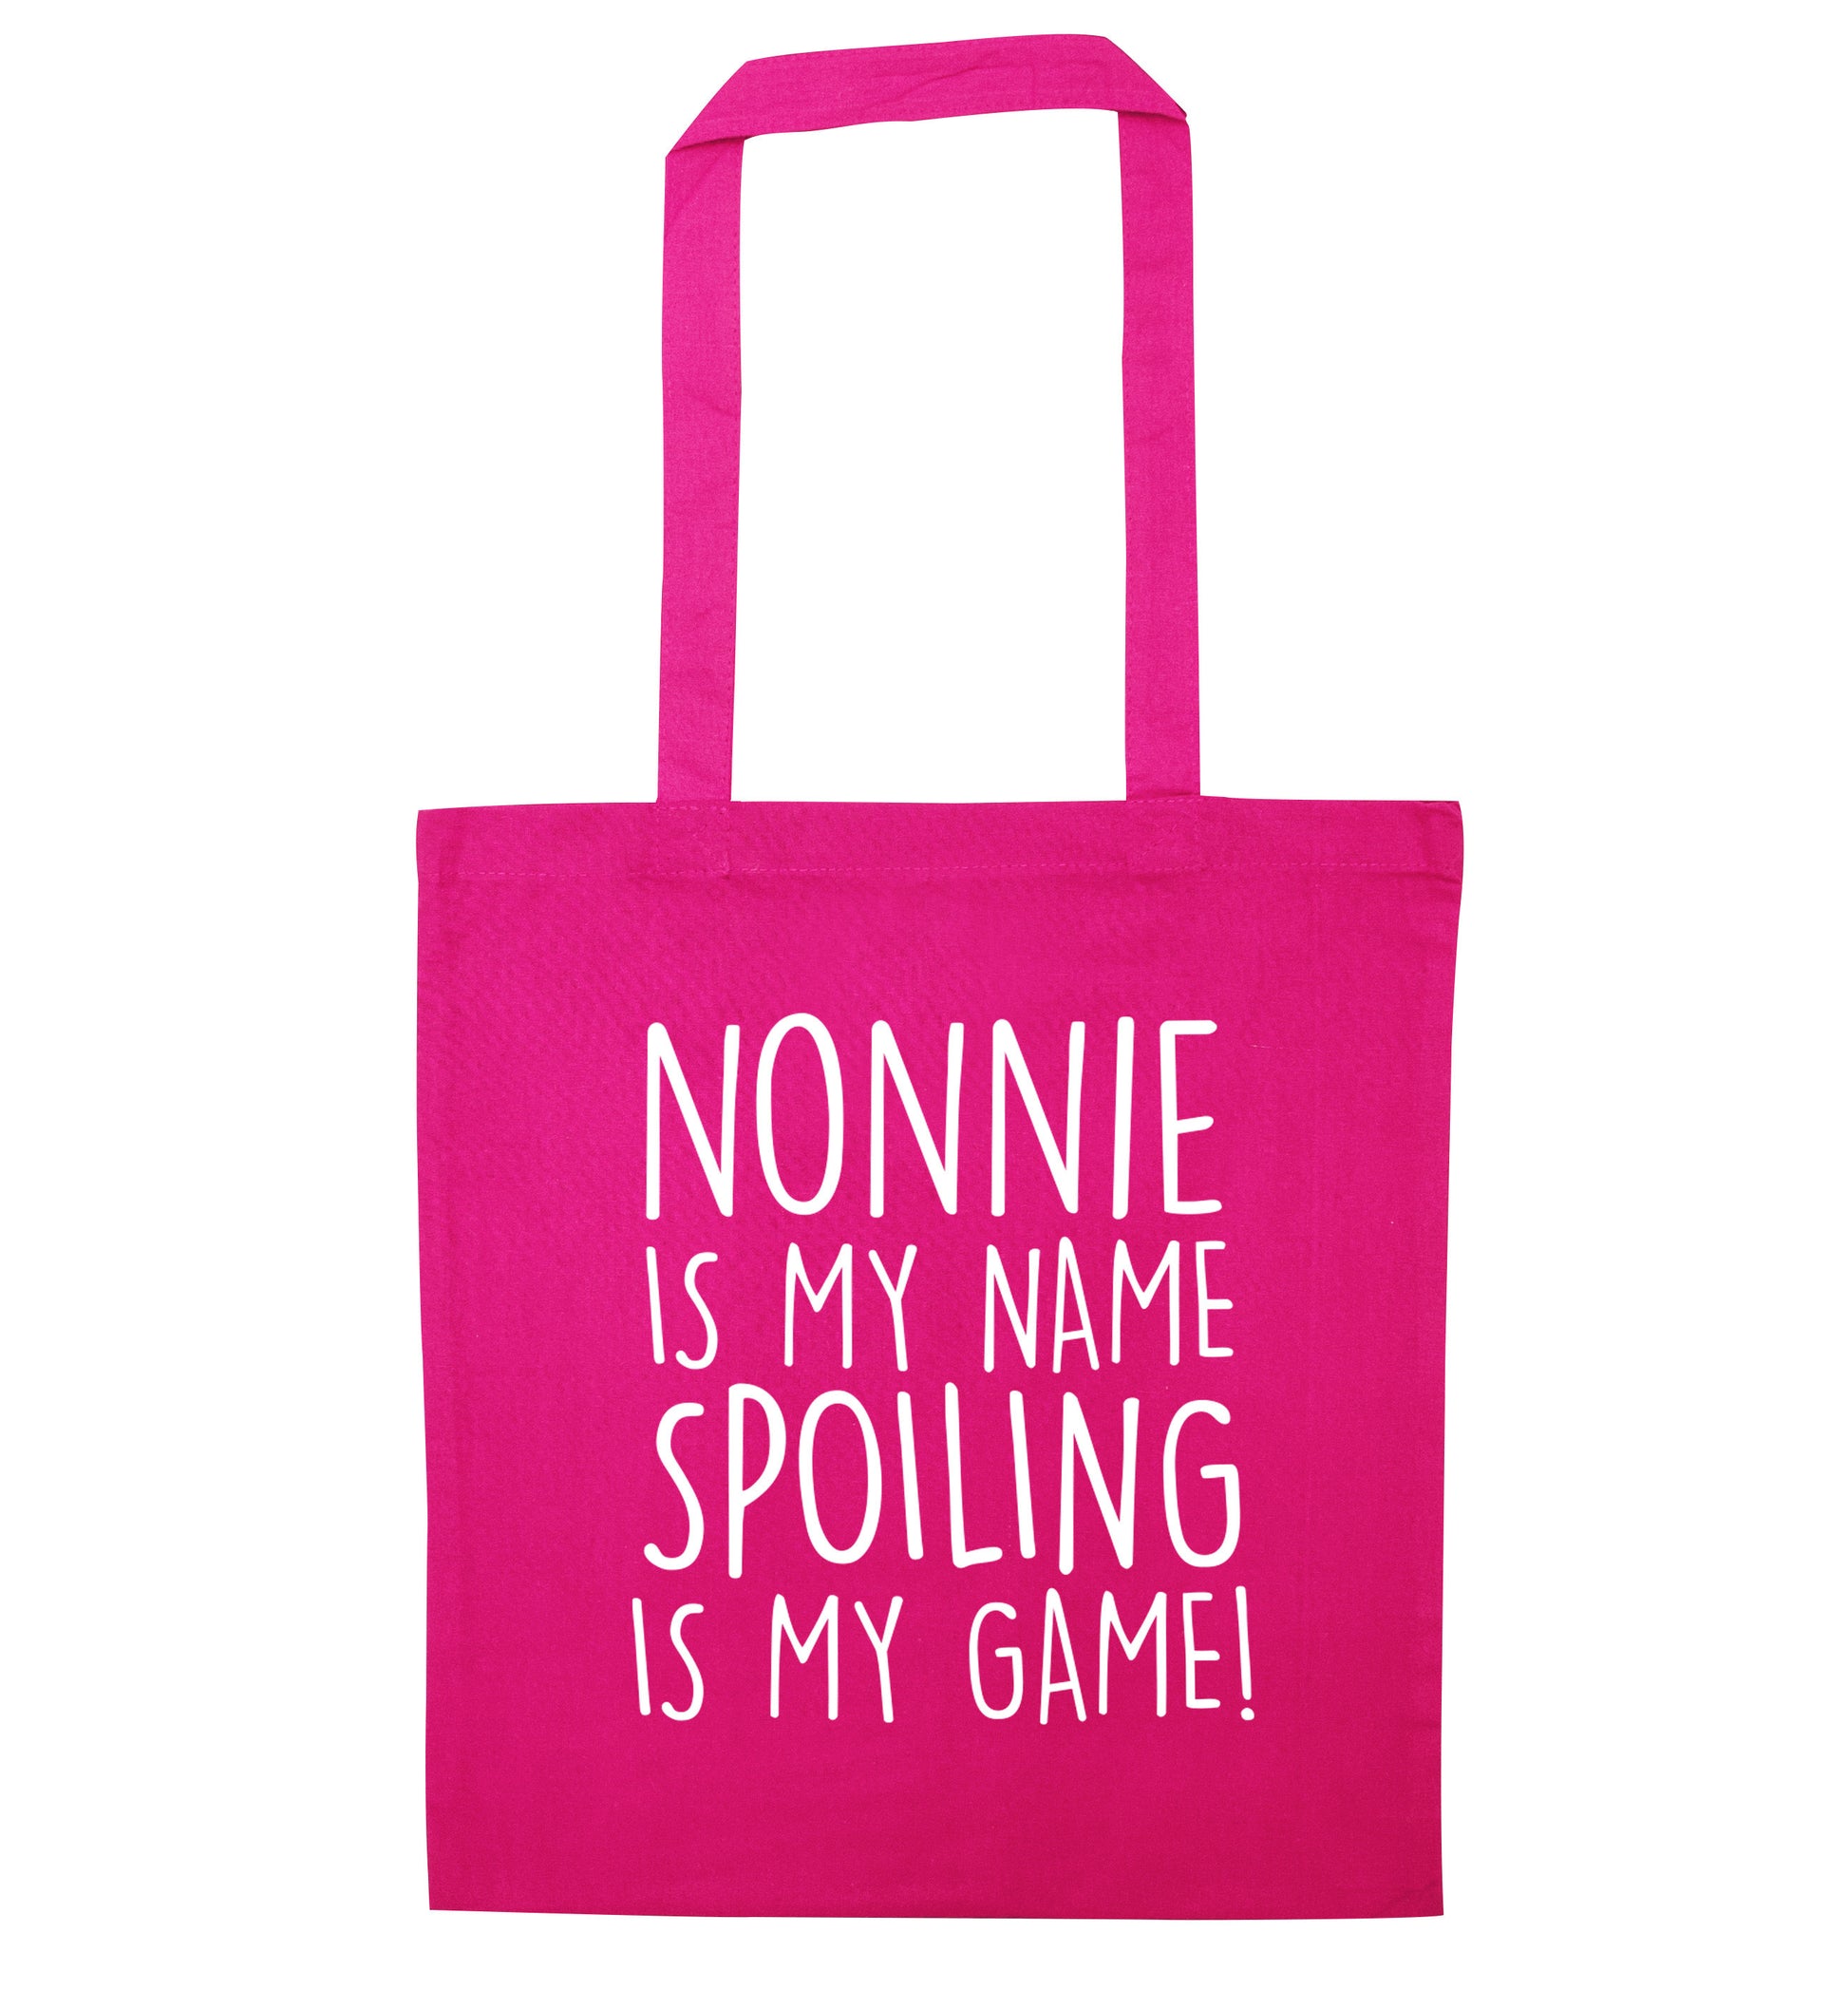 Nonnie is my name, spoiling is my game pink tote bag